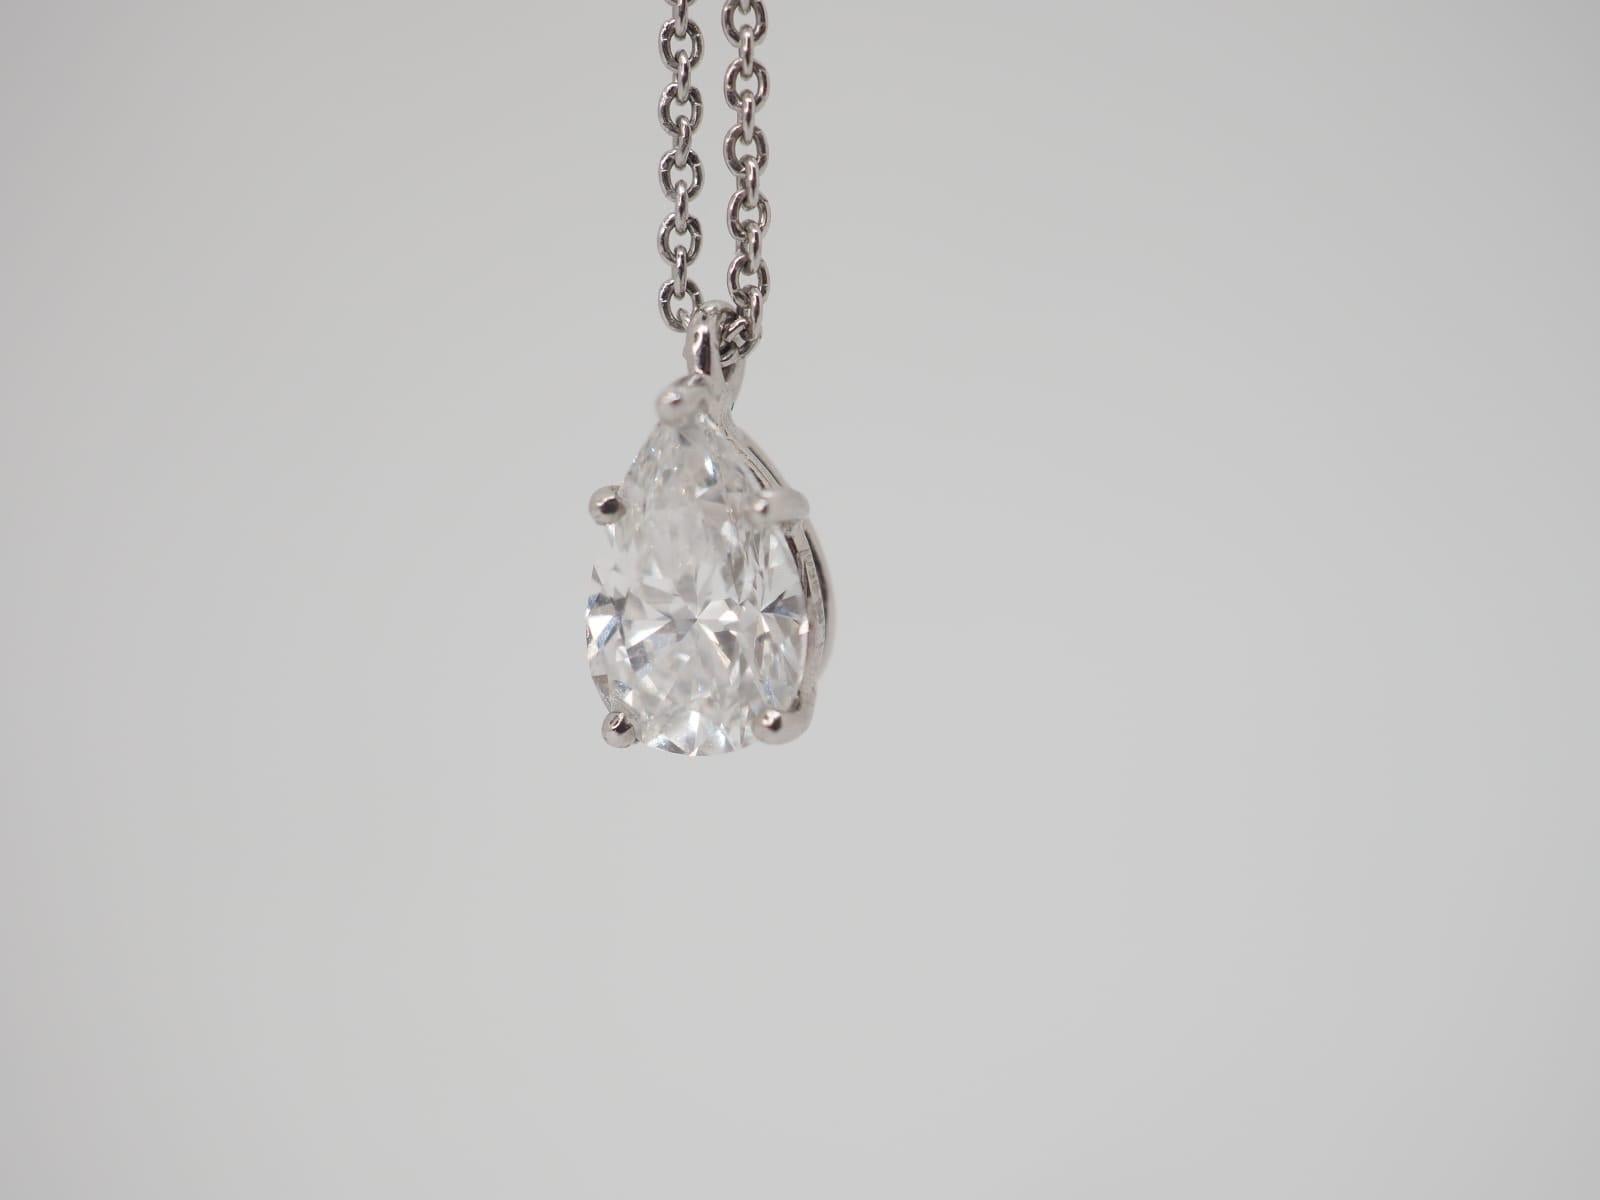 Authentic Graff diamond necklace with an endlessly elegant pear shape diamond pendant is especially alluring, with its streamlined silhouette complemented by a delicate platinum chain that allows the stone to take centre stage. 

Punched: